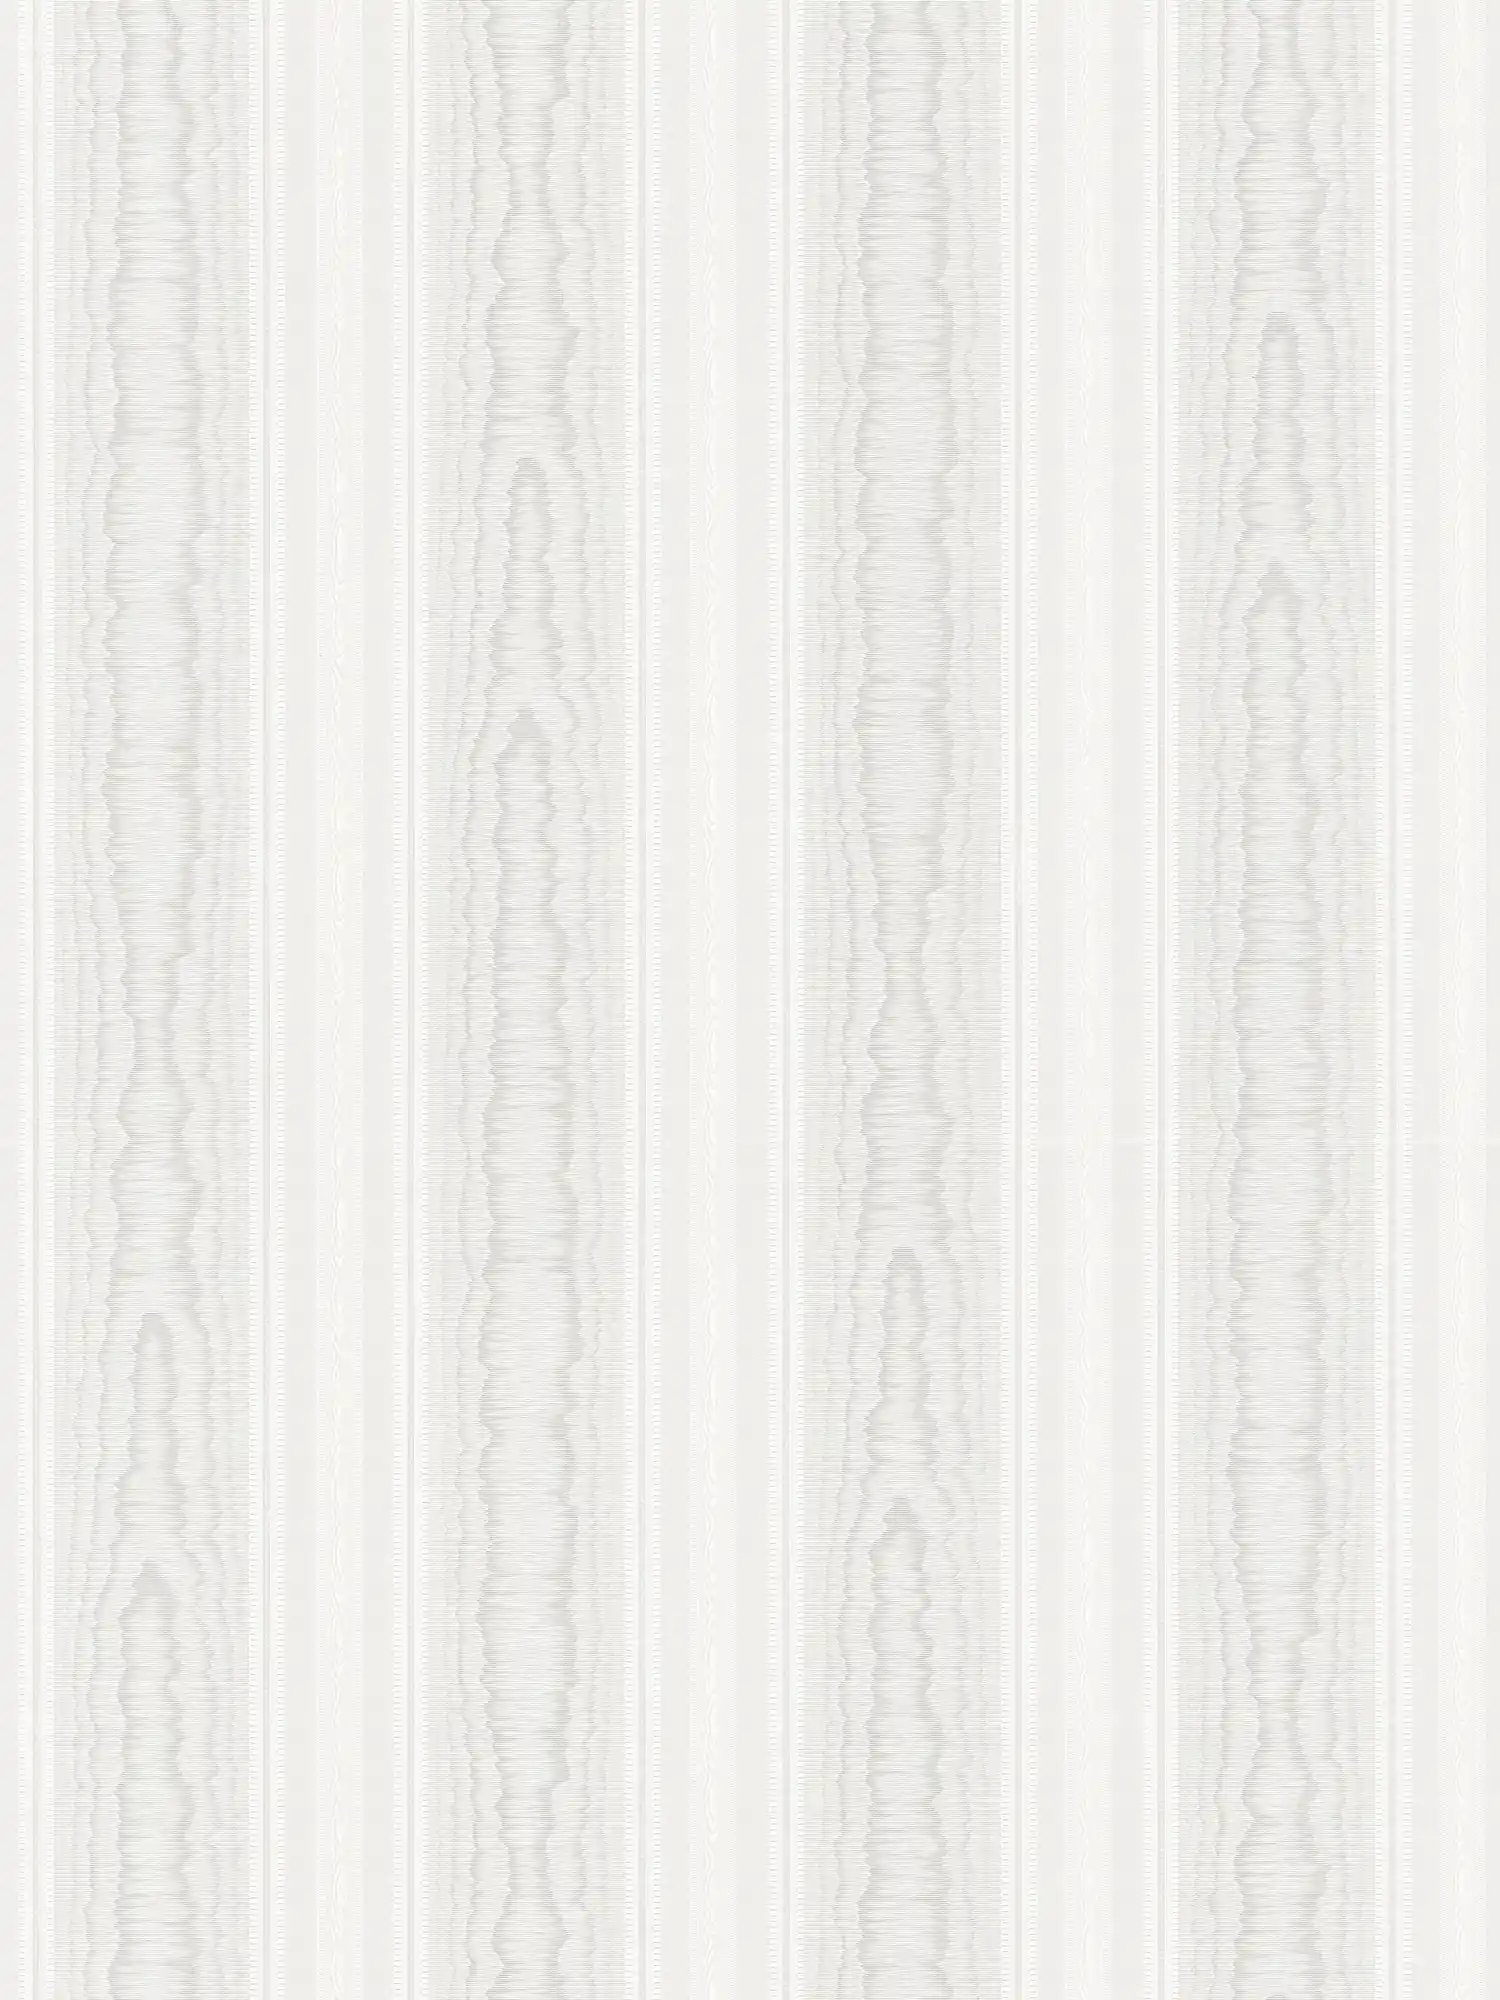         Striped wallpaper patterned with wood look - cream, white
    